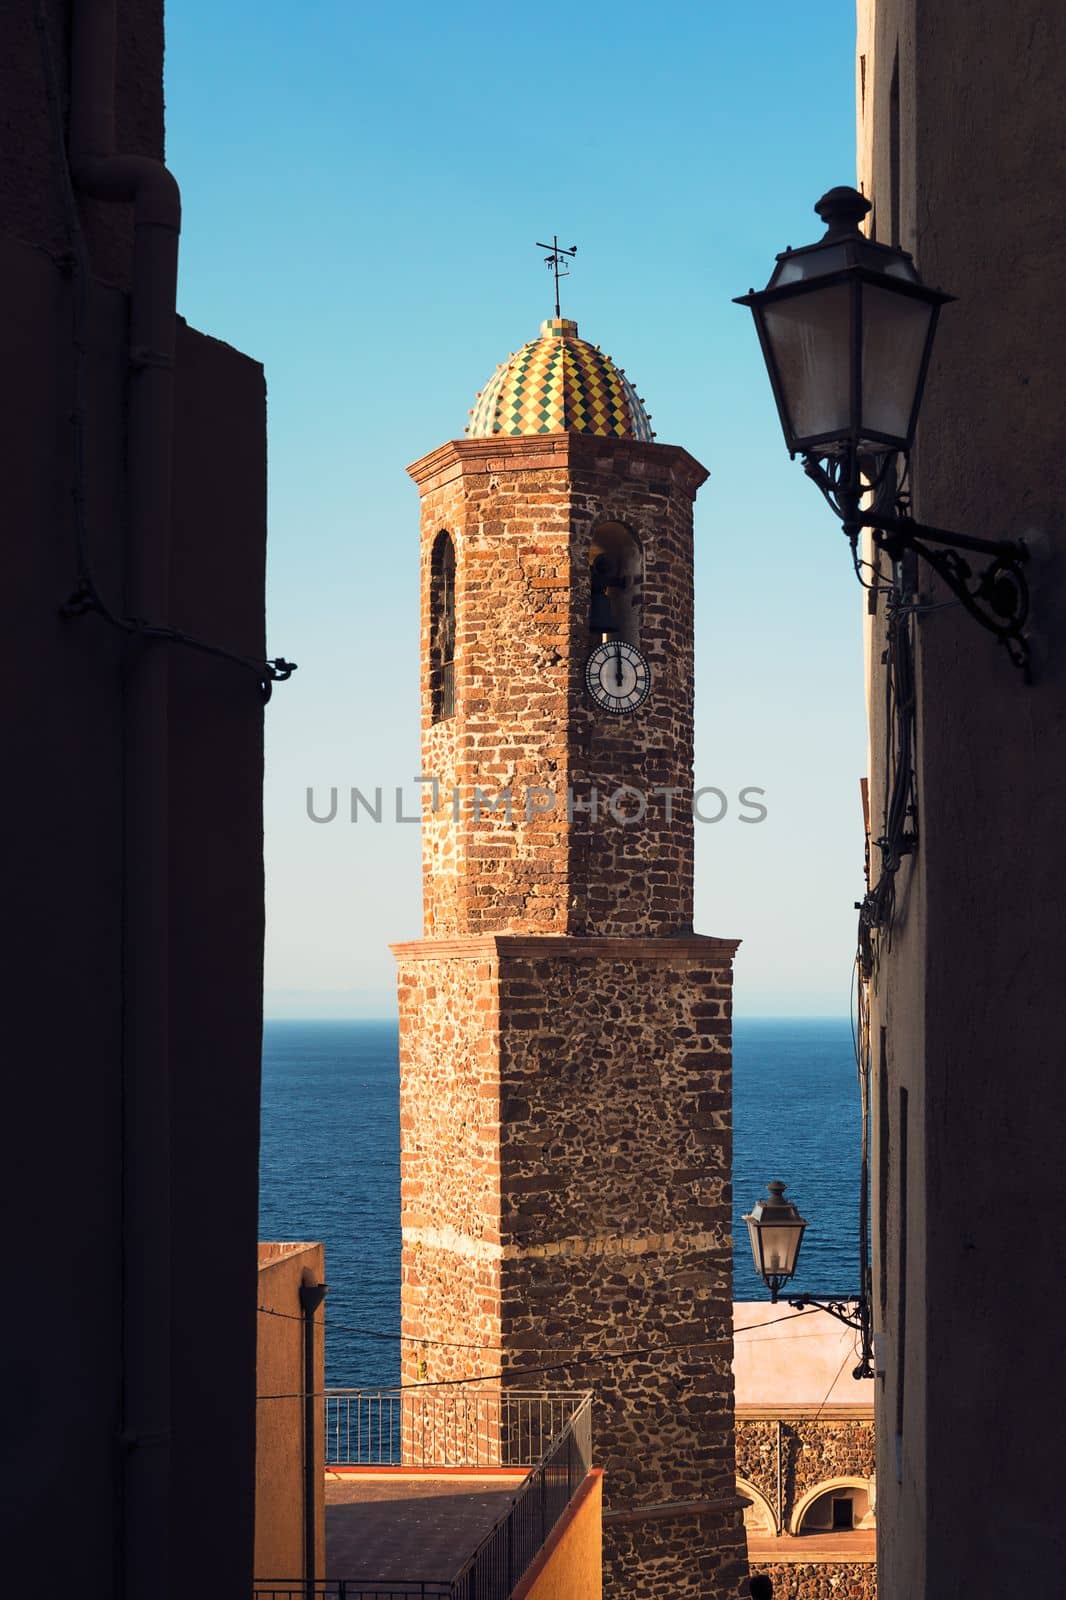 bell tower of the Castelsardo church in Sardinia, Italy, seen from the narrow streets of the citadel